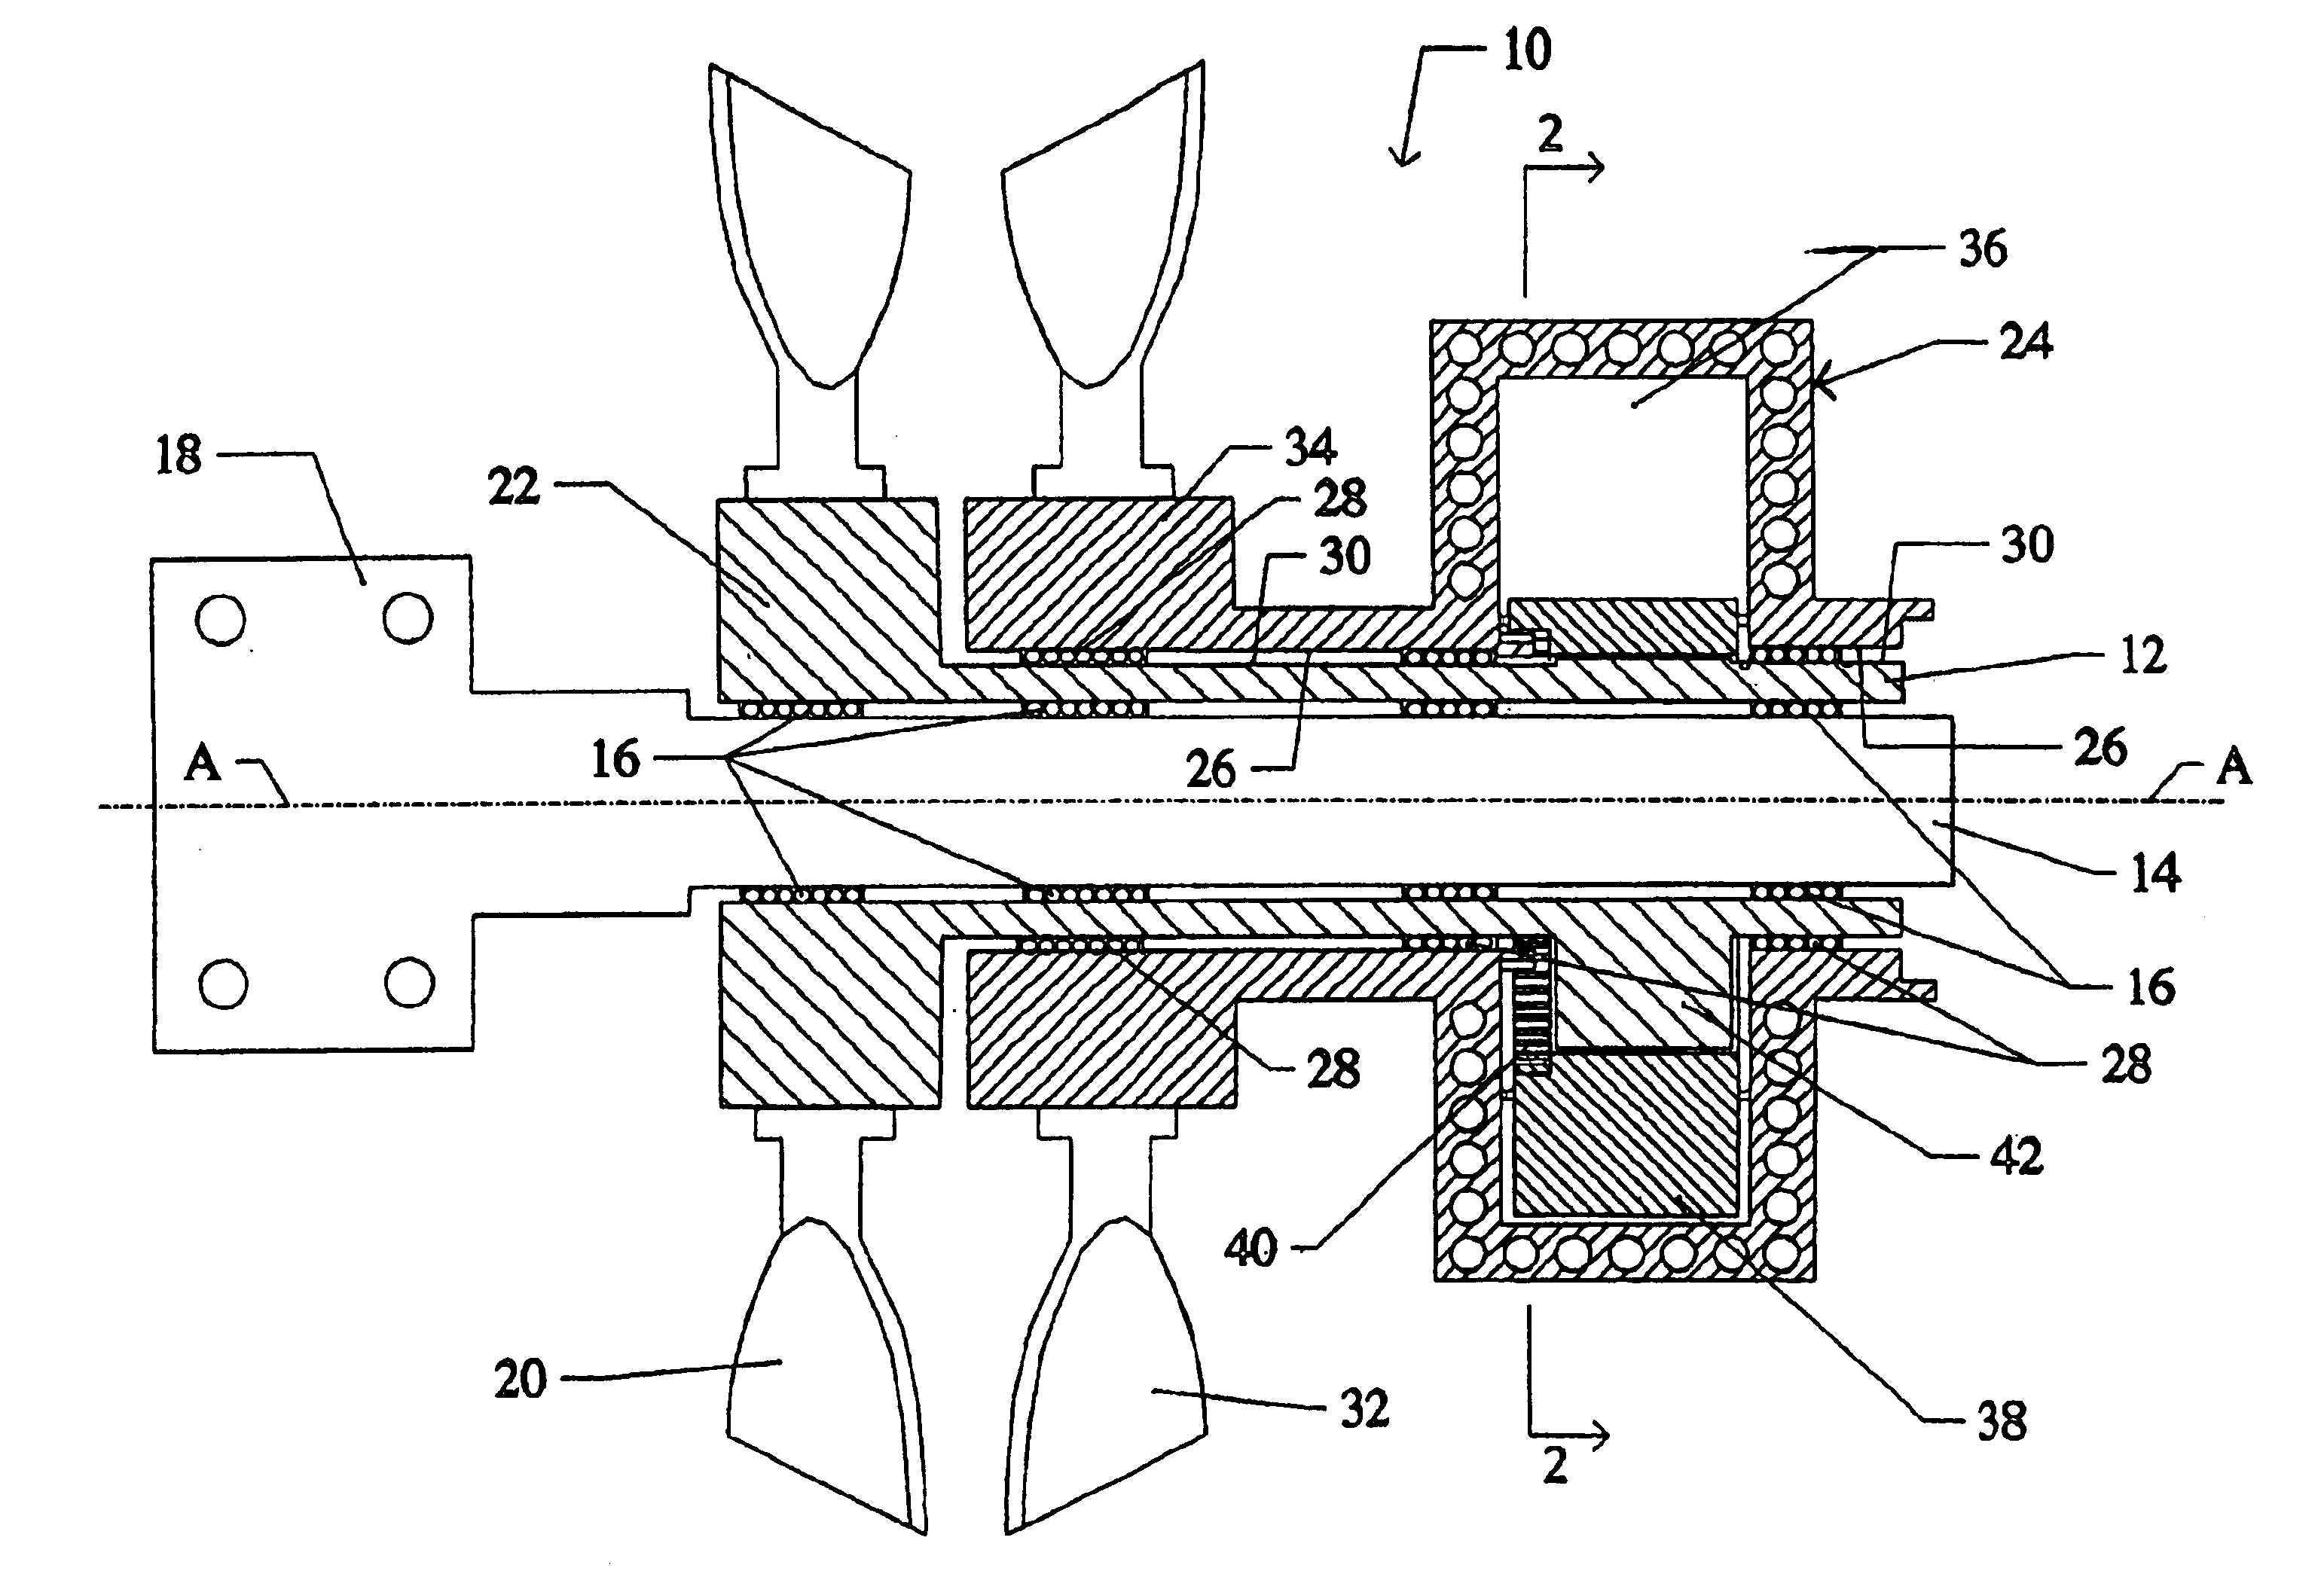 Rotary engine with counter-rotating housing and output shaft mounted on stationary spindle